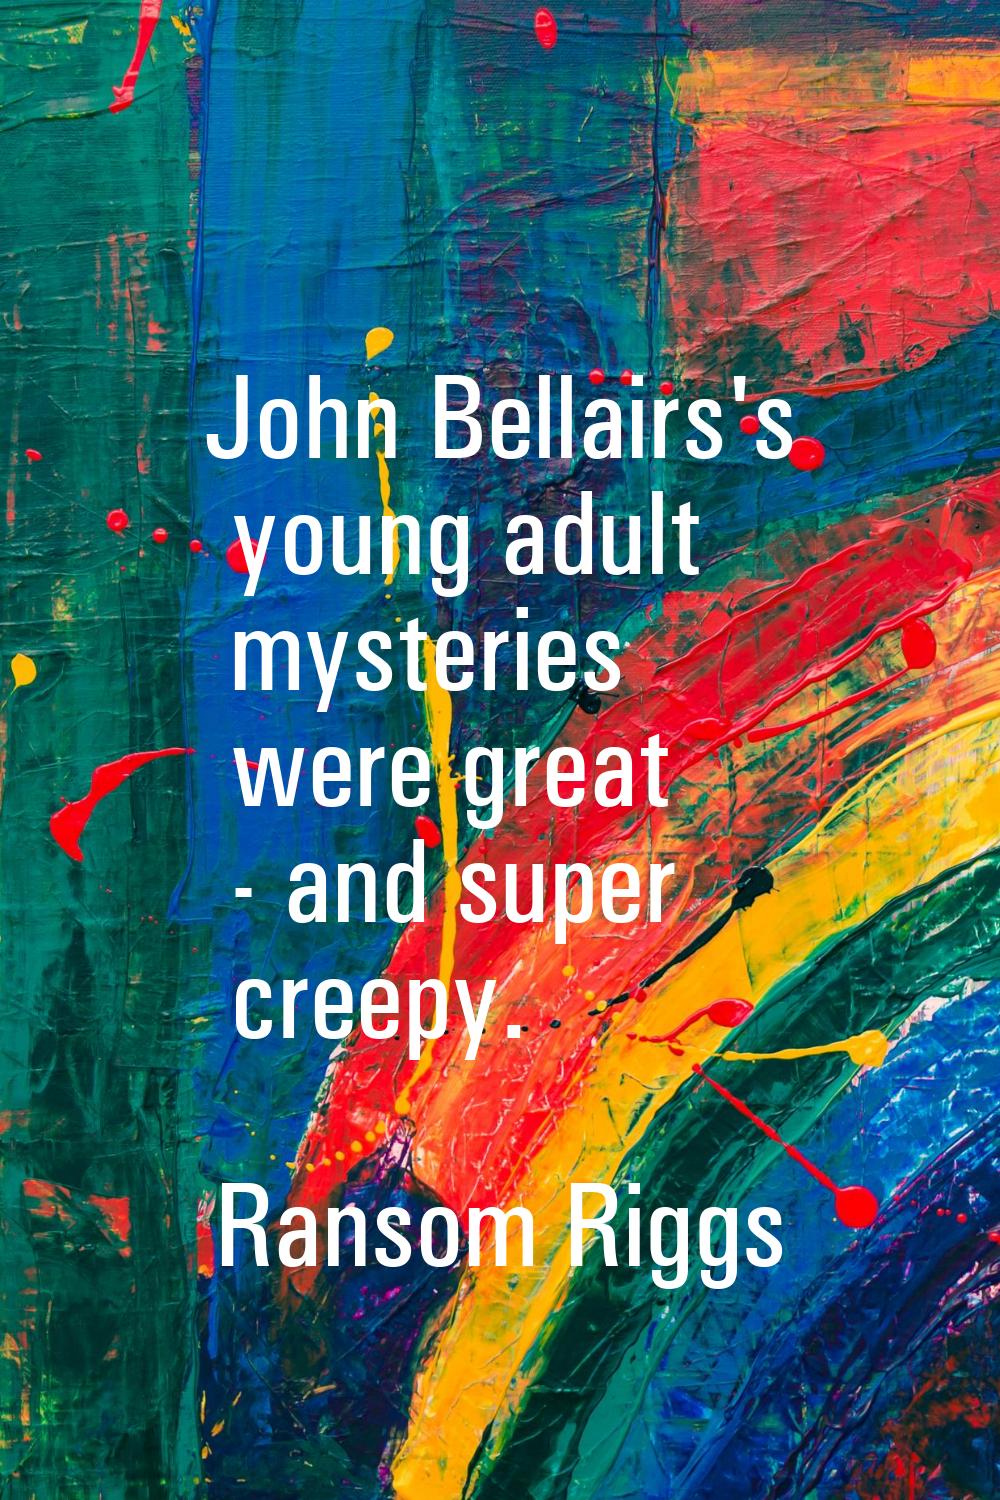 John Bellairs's young adult mysteries were great - and super creepy.